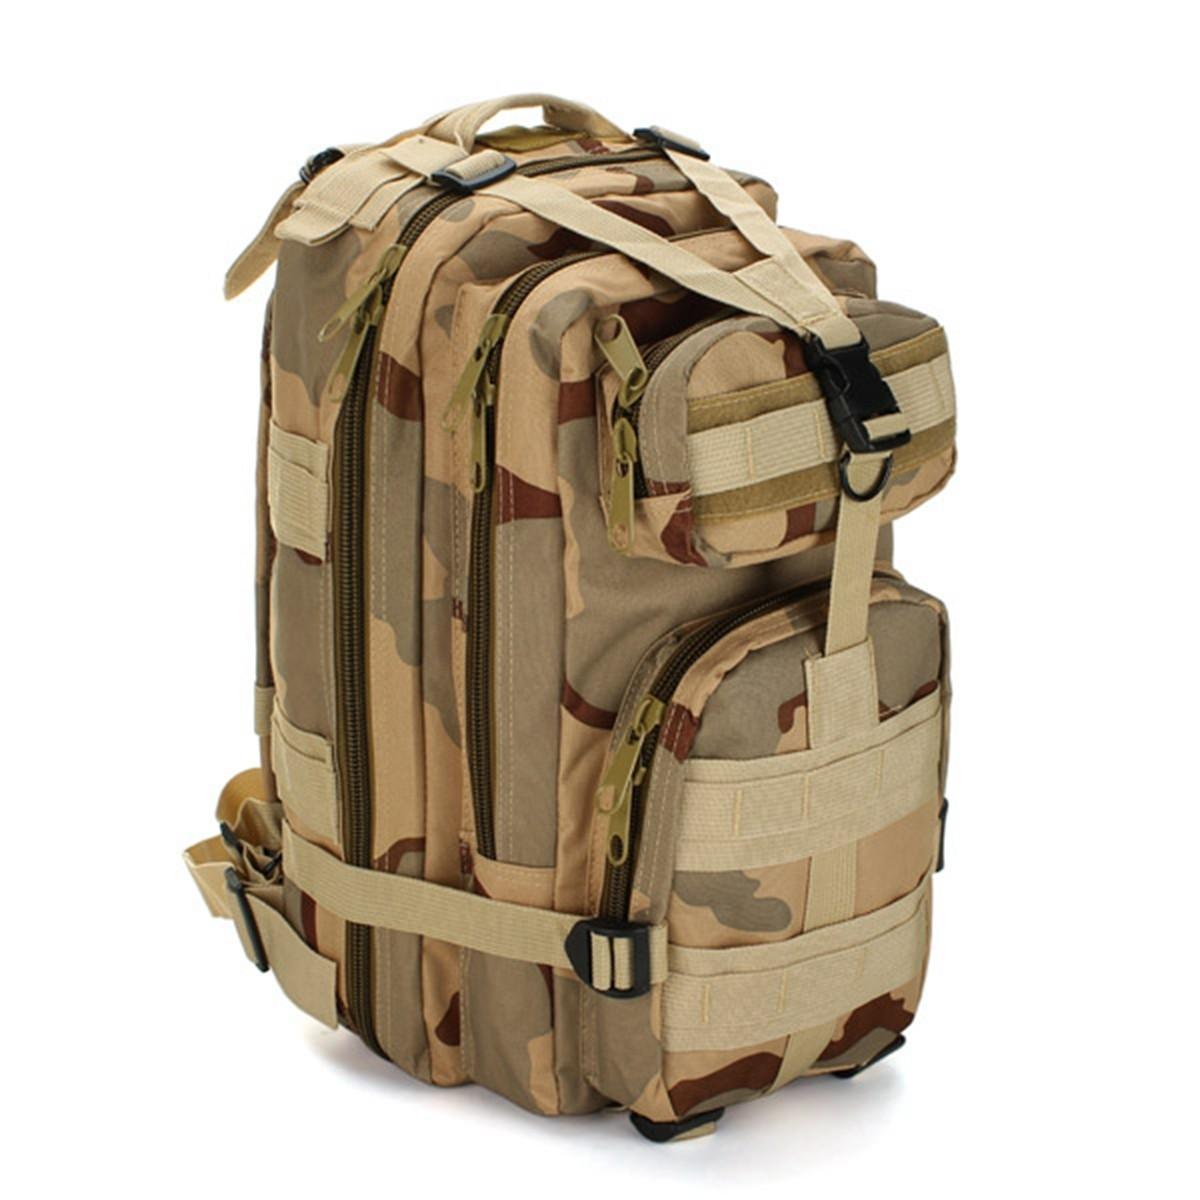 Tactical Military Outdoor Molle System 10" Laptop Bag Hiking Camping 